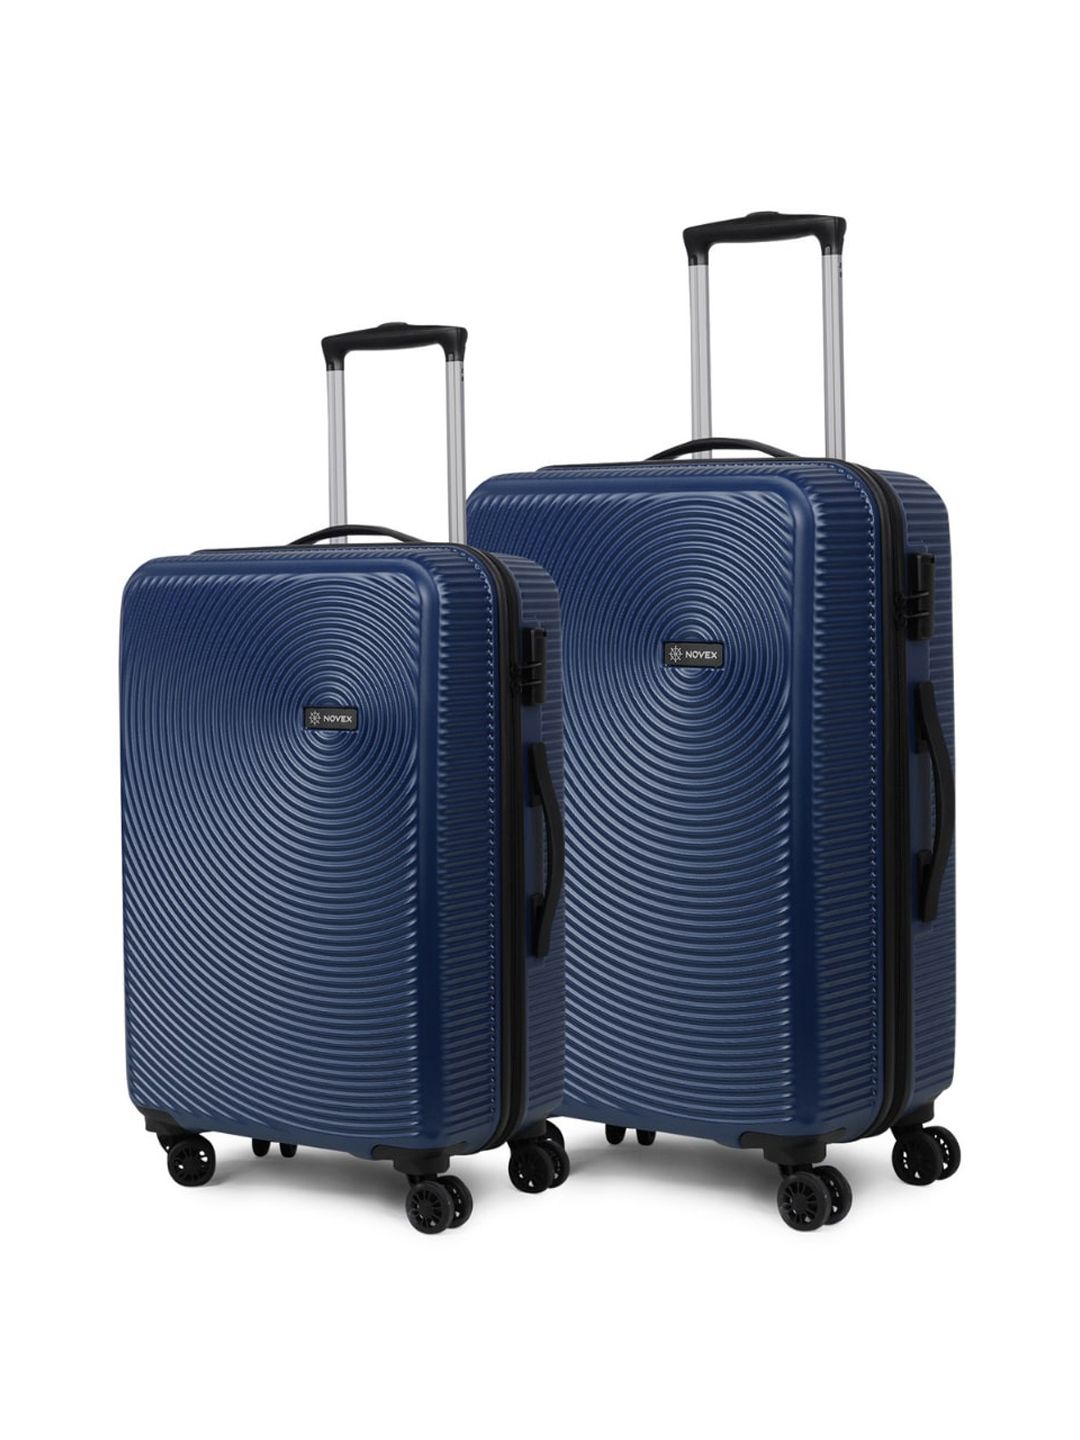 NOVEX Unisex Set Of 2 Blue Textured Hard-Sided Trolley Suitcases Price in India